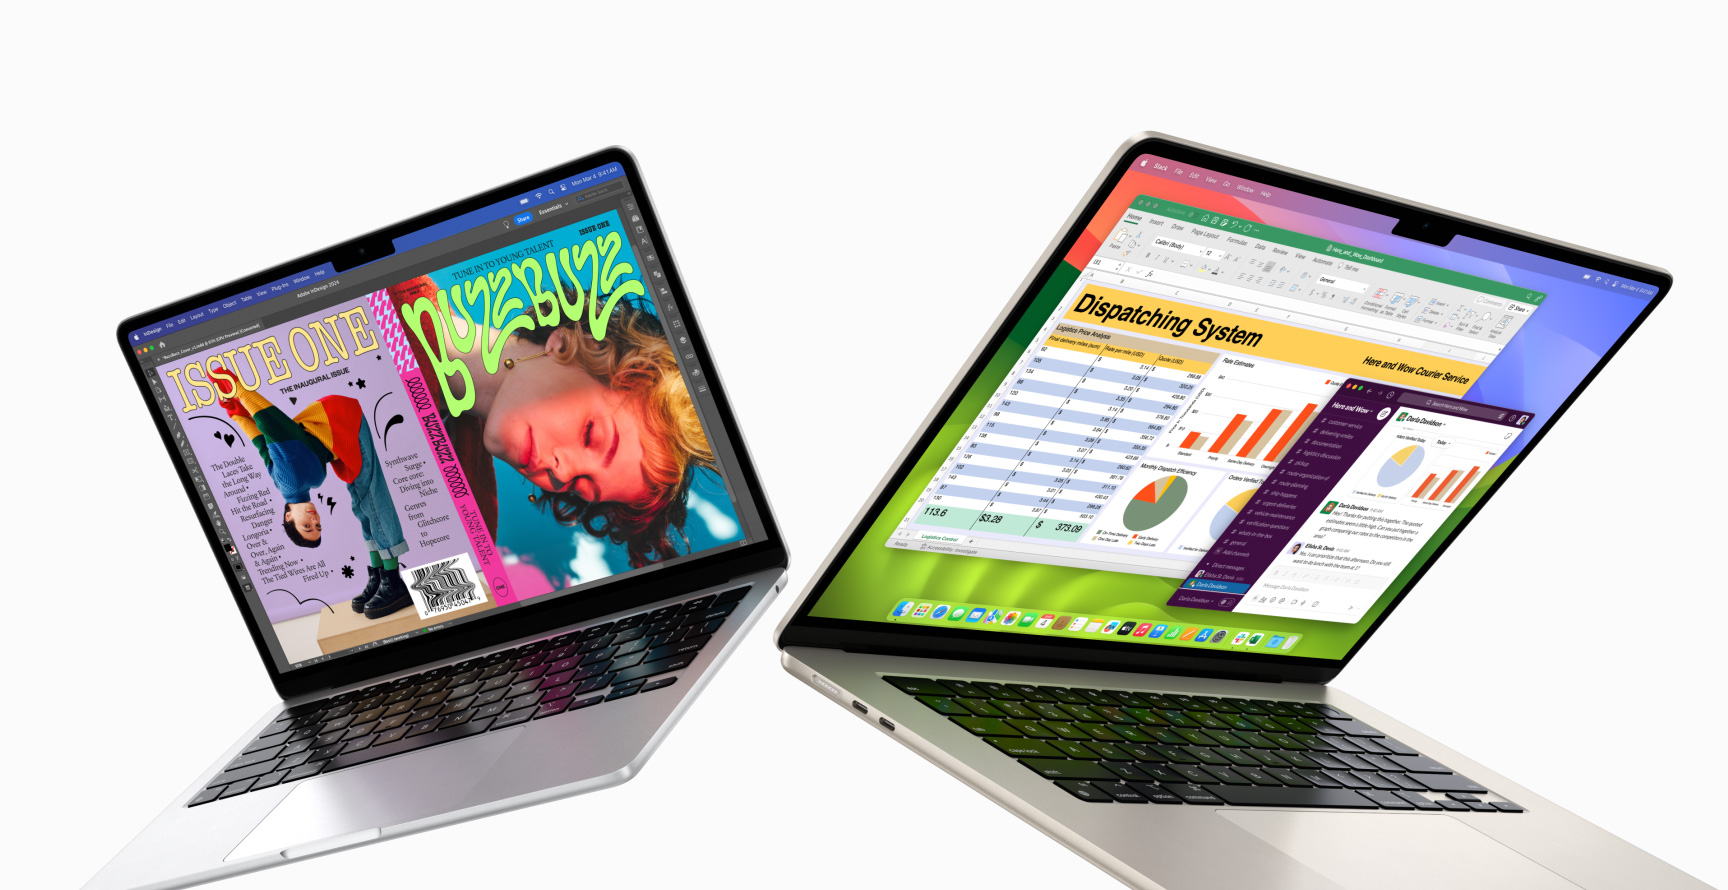 Partially open 13″ MacBook Air on left and 15″ MacBook Air on right. 13″ screen shows colourful ‘zine cover created with In Design. 15″ screen shows Microsoft Excel and Slack.